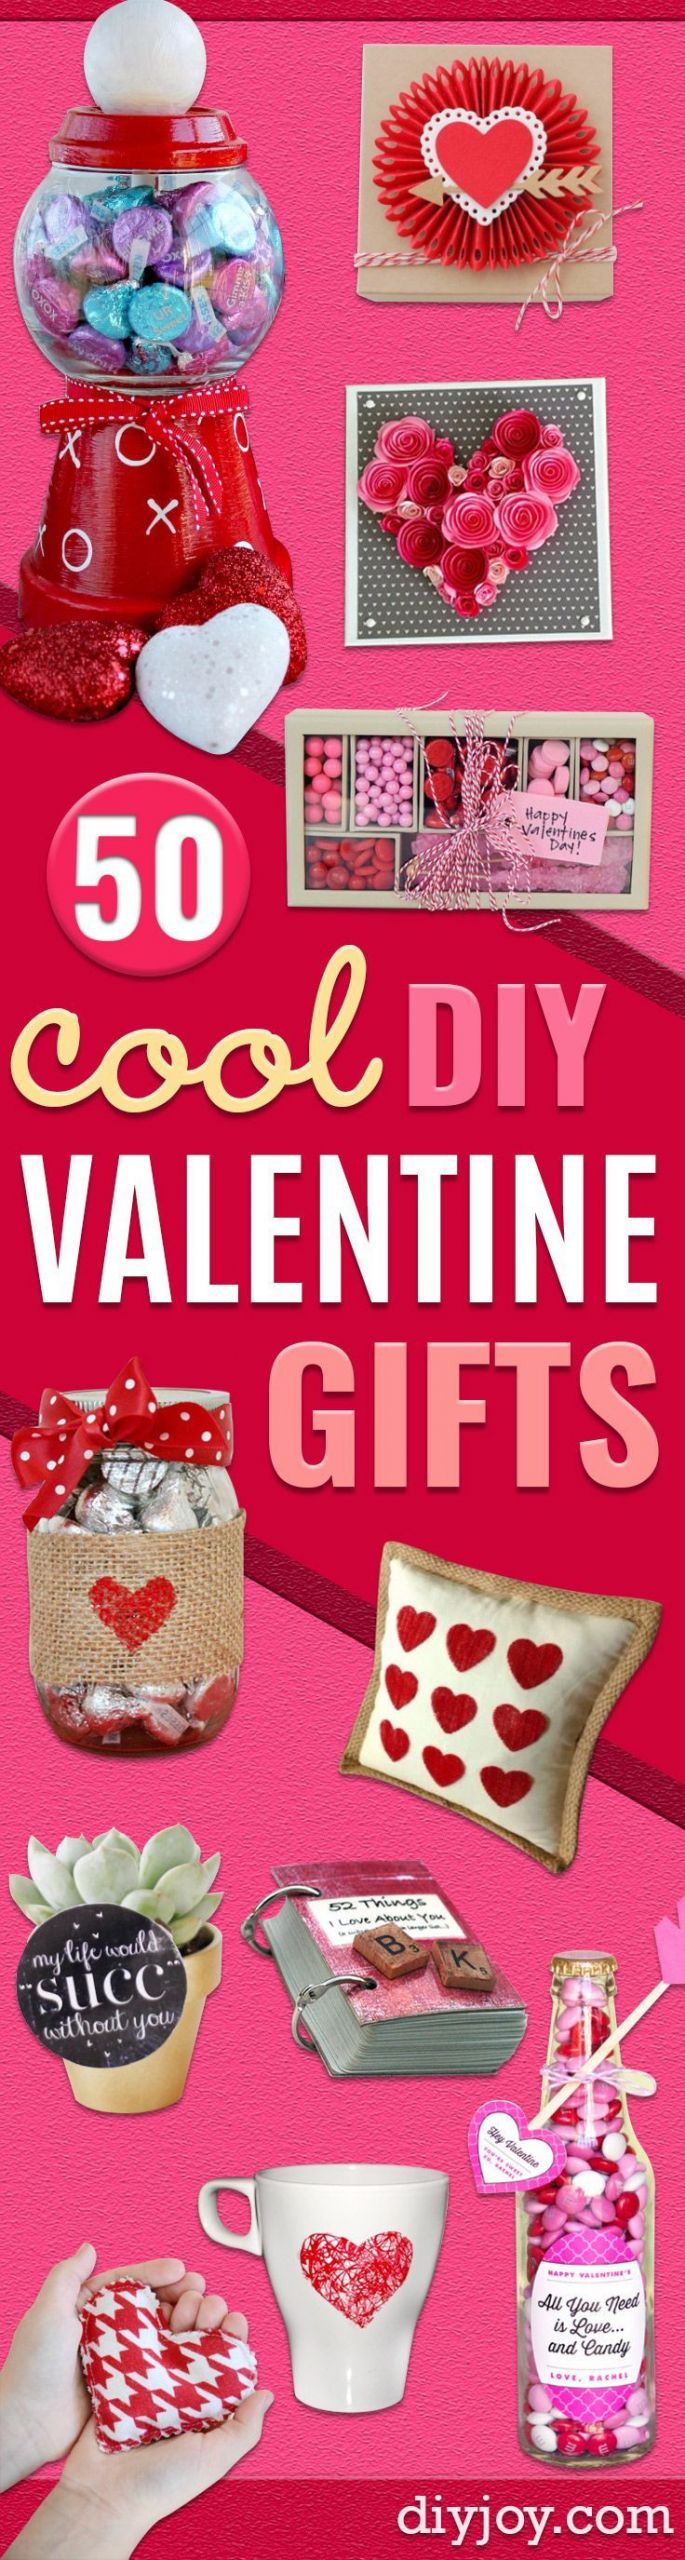 DIY Valentines Gifts For Girlfriend
 50 Cool and Easy DIY Valentine’s Day Gifts